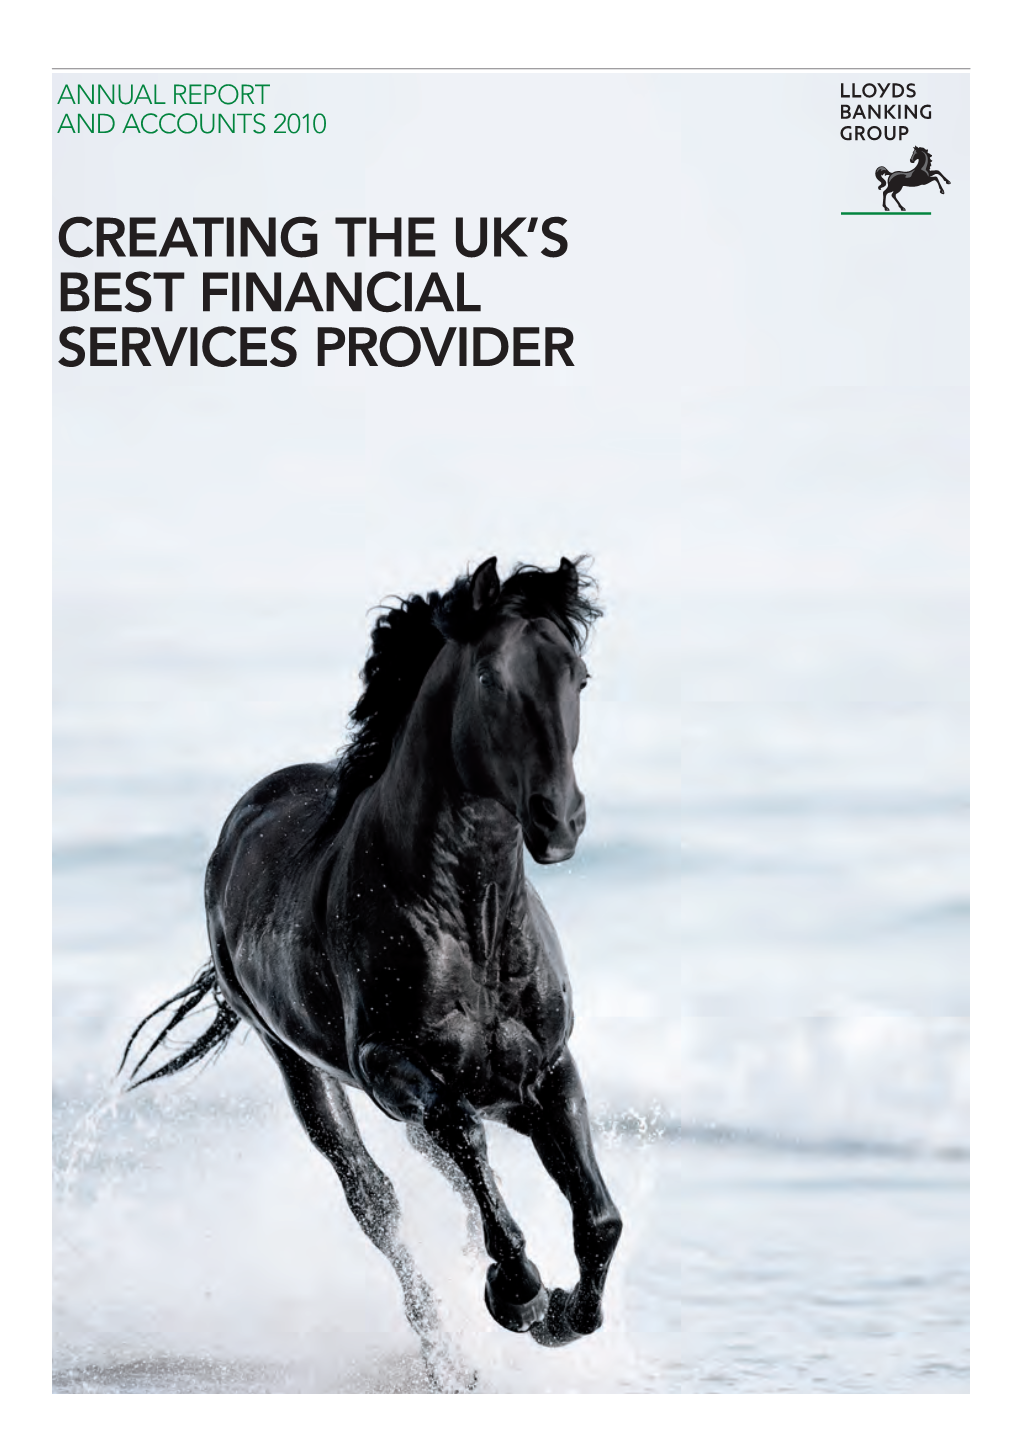 Lloyds Banking Group Annual Report and Accounts 2010